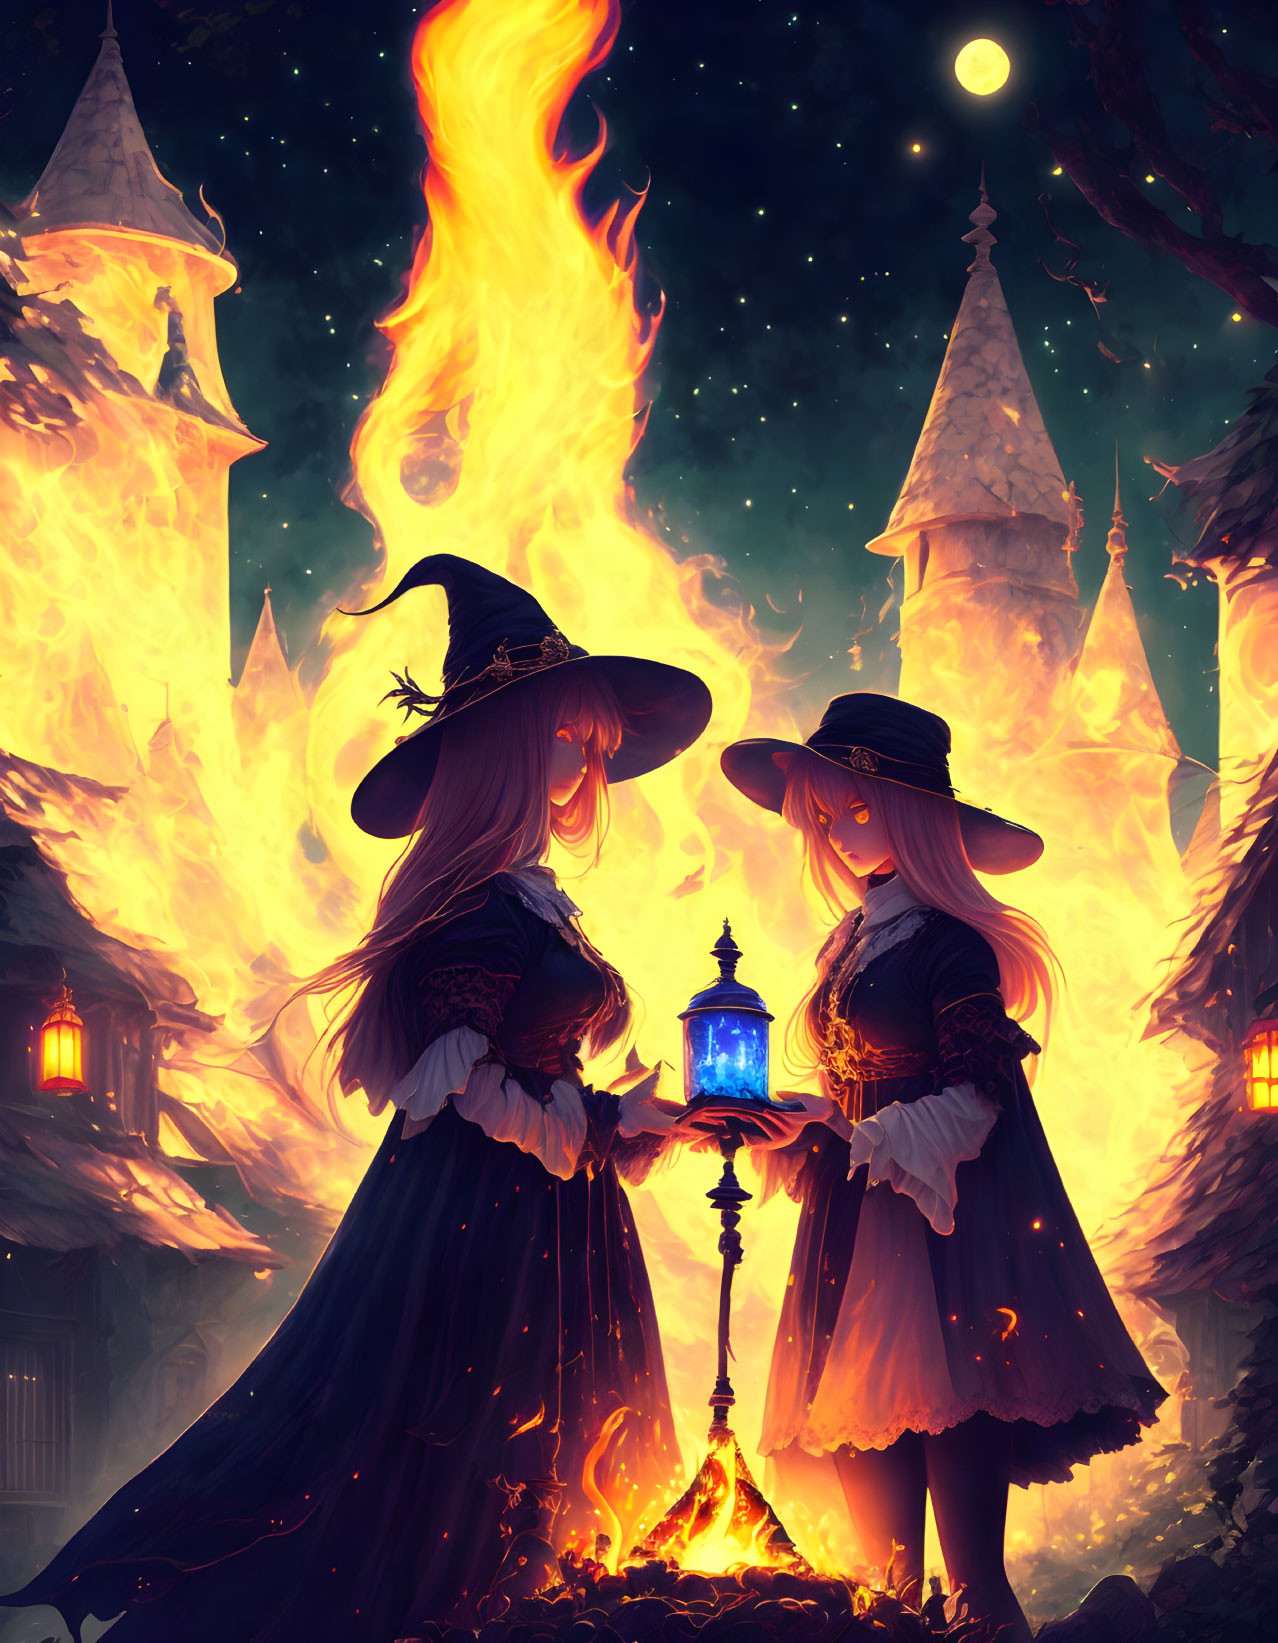 Two witches with glowing lanterns by a fire in magical attire, towers under twilight sky.